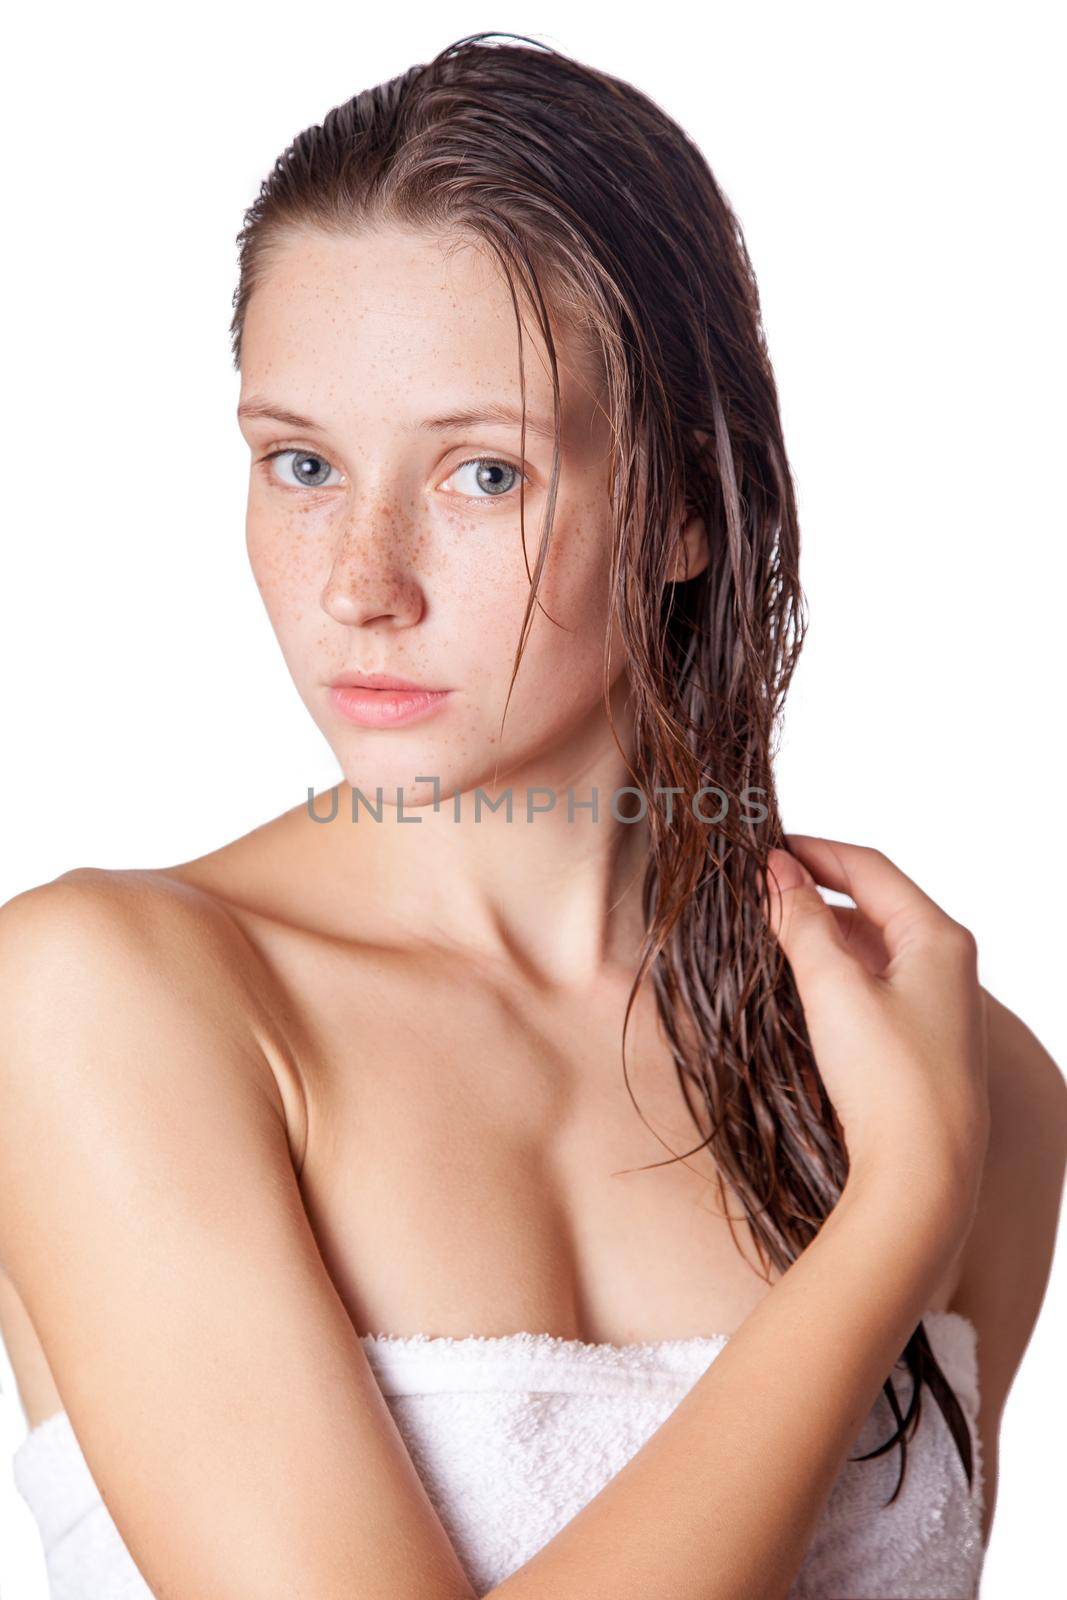 Portrait of a beautiful model with wet hair and clean skin and freckles after shower isolated on white background.